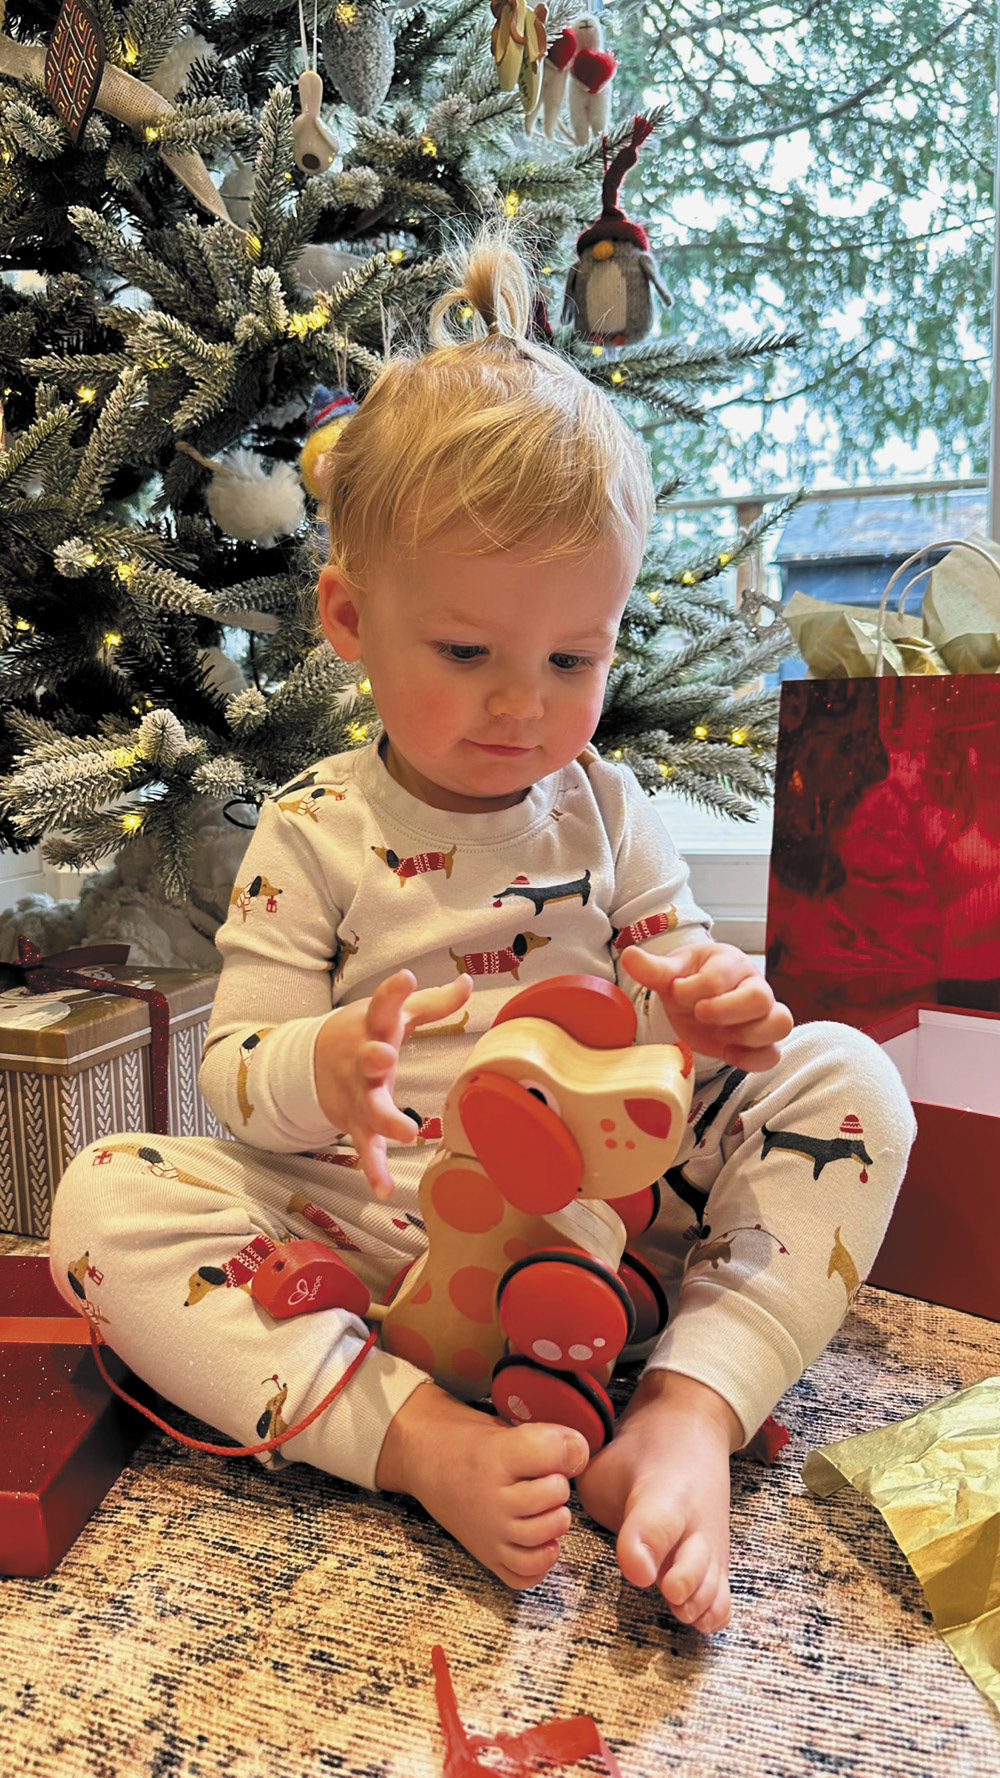 A toddler playing with a wooden dog underneath a Christmas tree.